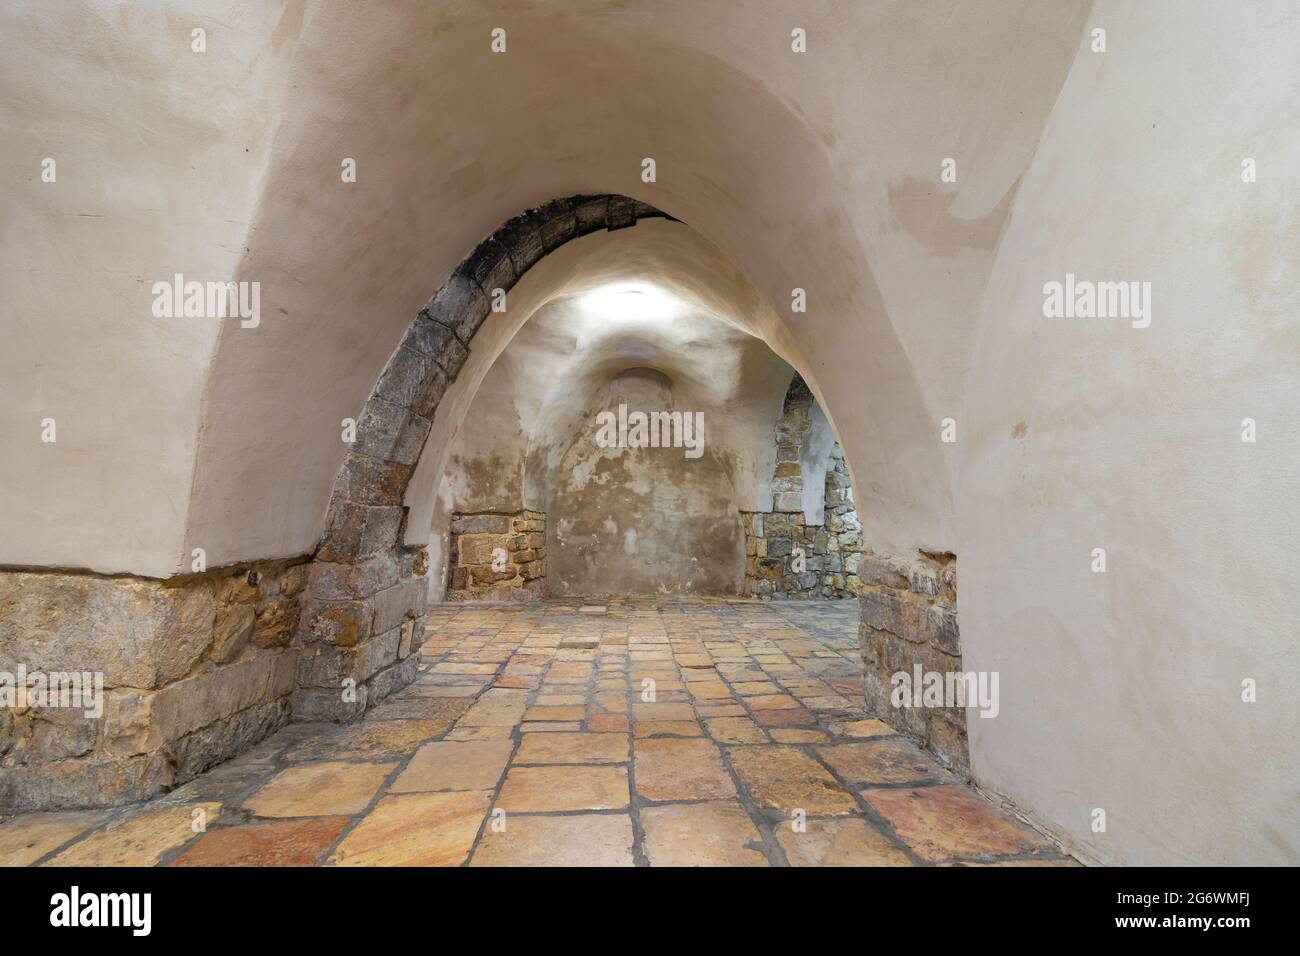 The ancient cave where the famous King David's tomb is located in the Old City of Jerusalem, at night Stock Photo